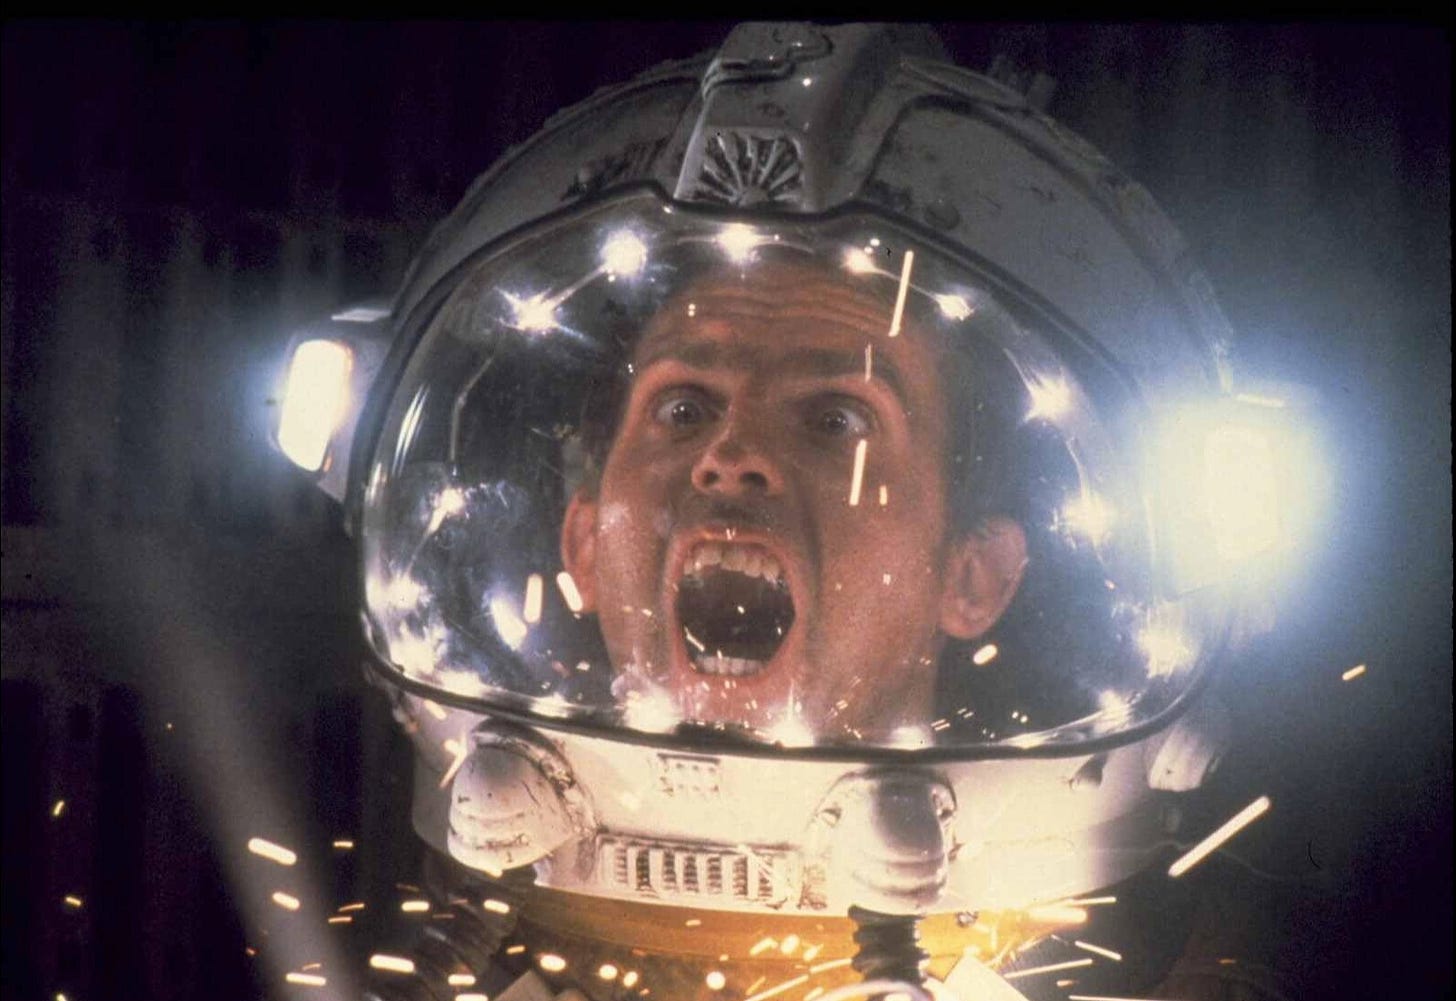 CLoseup from the movie of man in space helmet screaming